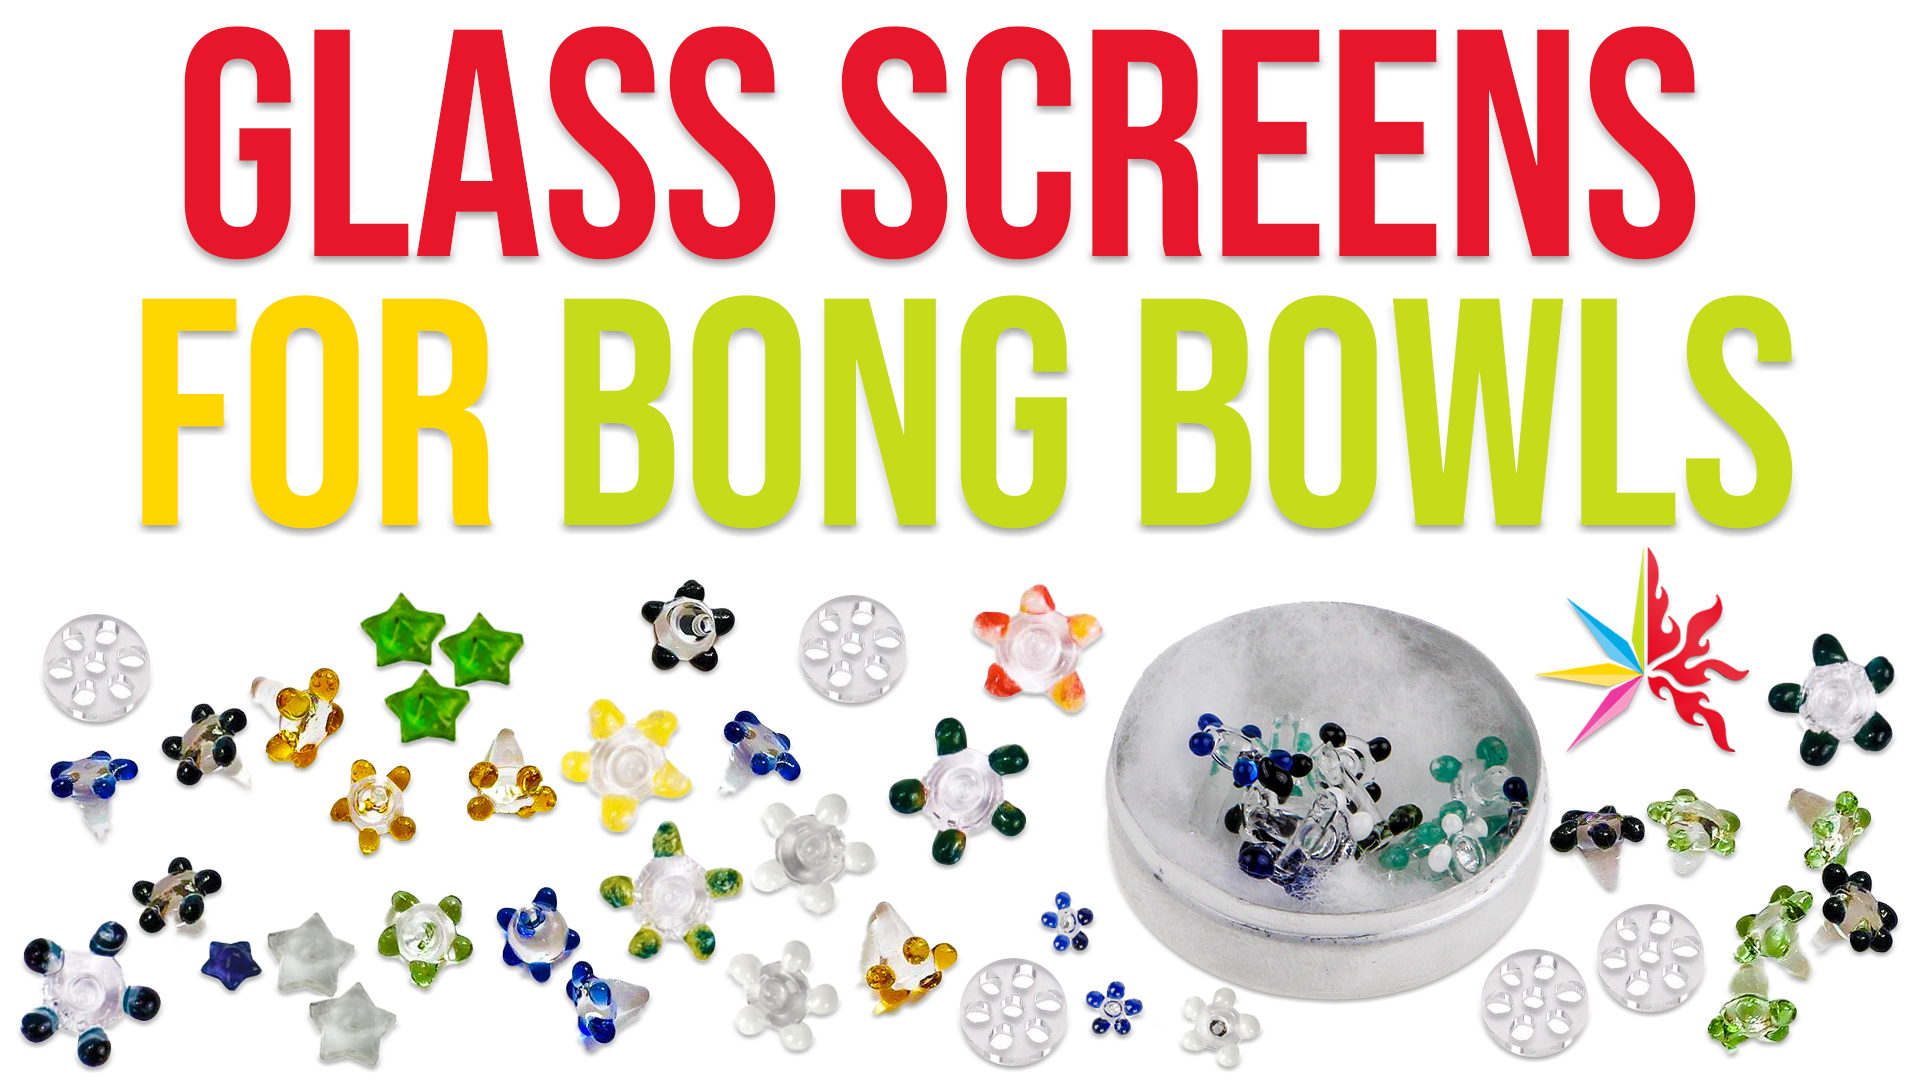  Glass Screens For Bowls